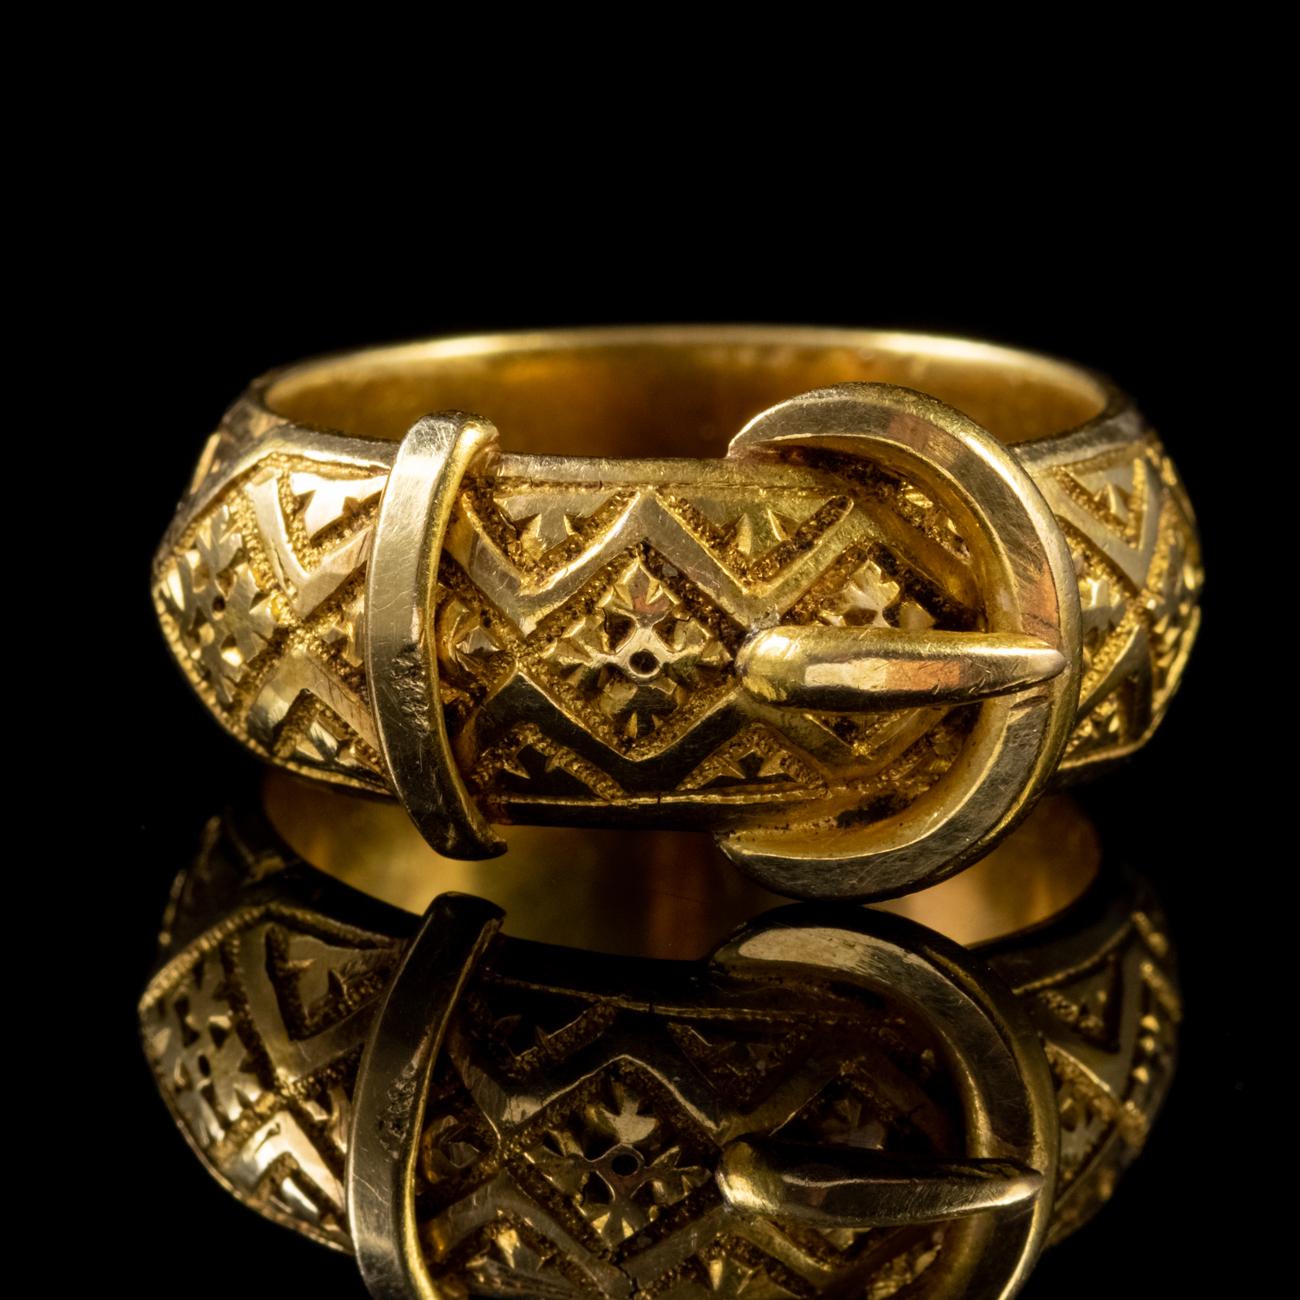 This fabulous Antique Victorian ring has been modelled in 18ct Yellow Gold to form the shape of a belt and buckle with beautiful and intricate engravings all the way around. It has an impressive weight due to its design and weighs a staggering 8.5